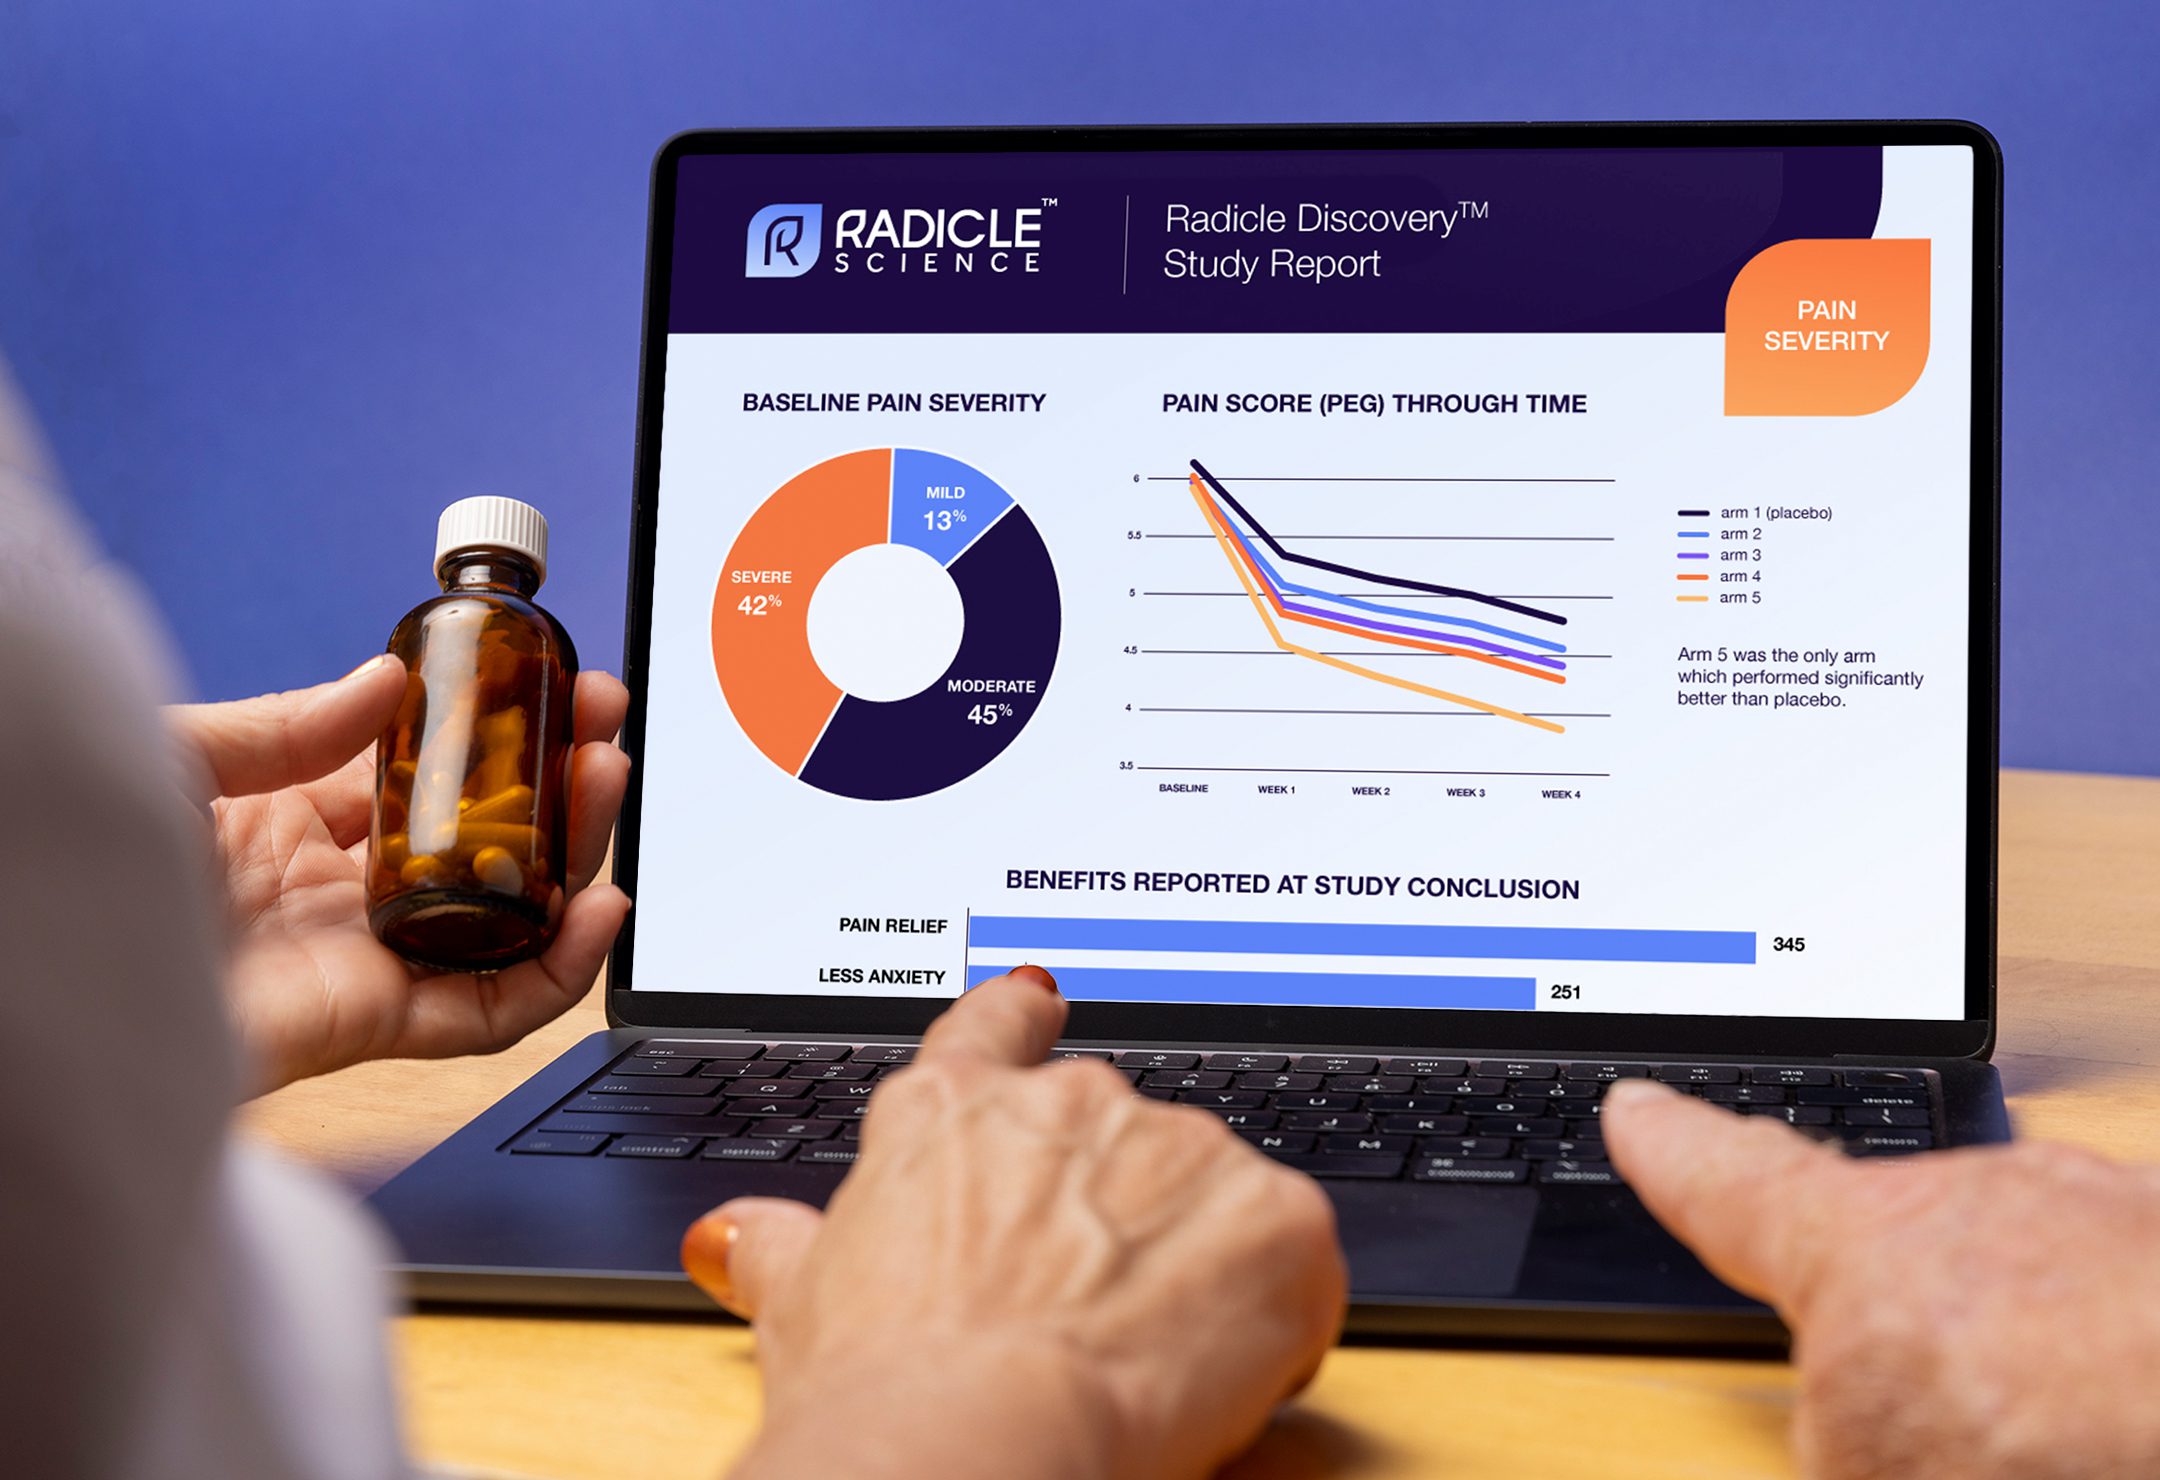 an image of a scientific report labeled radicle science on a computer screen and a hand holding a unlabeled pill bottle